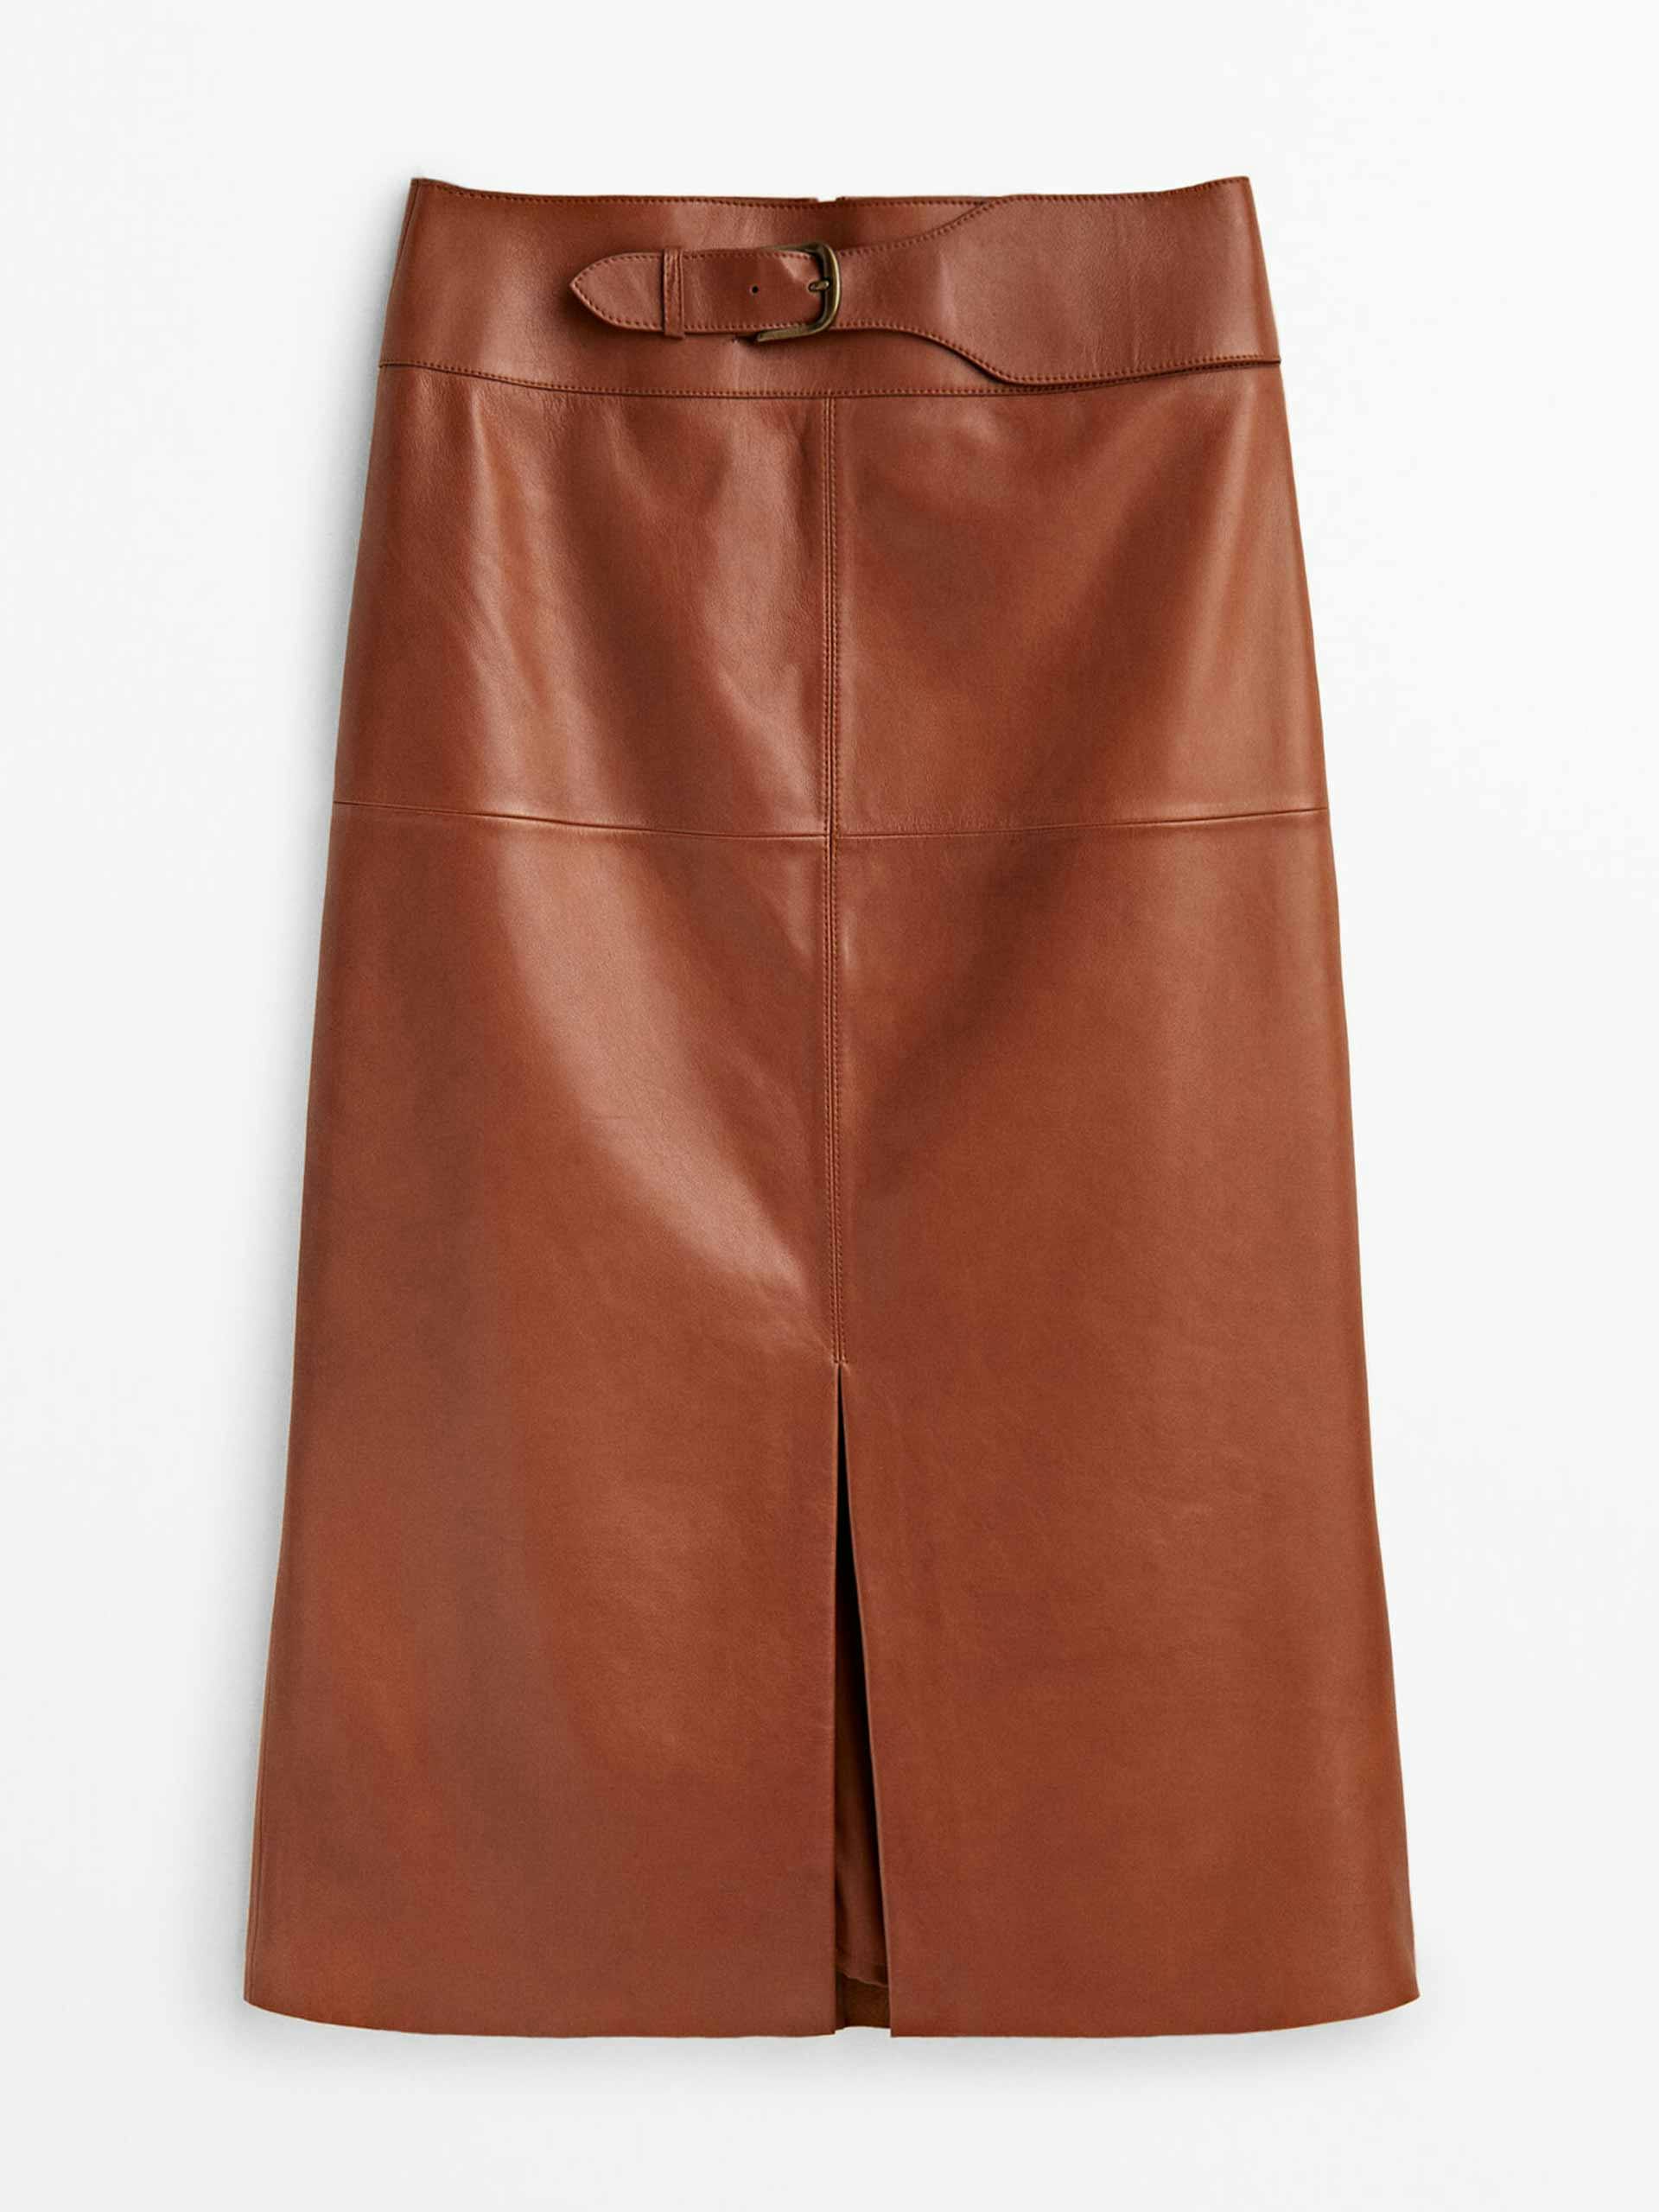 Leather skirt with buckle